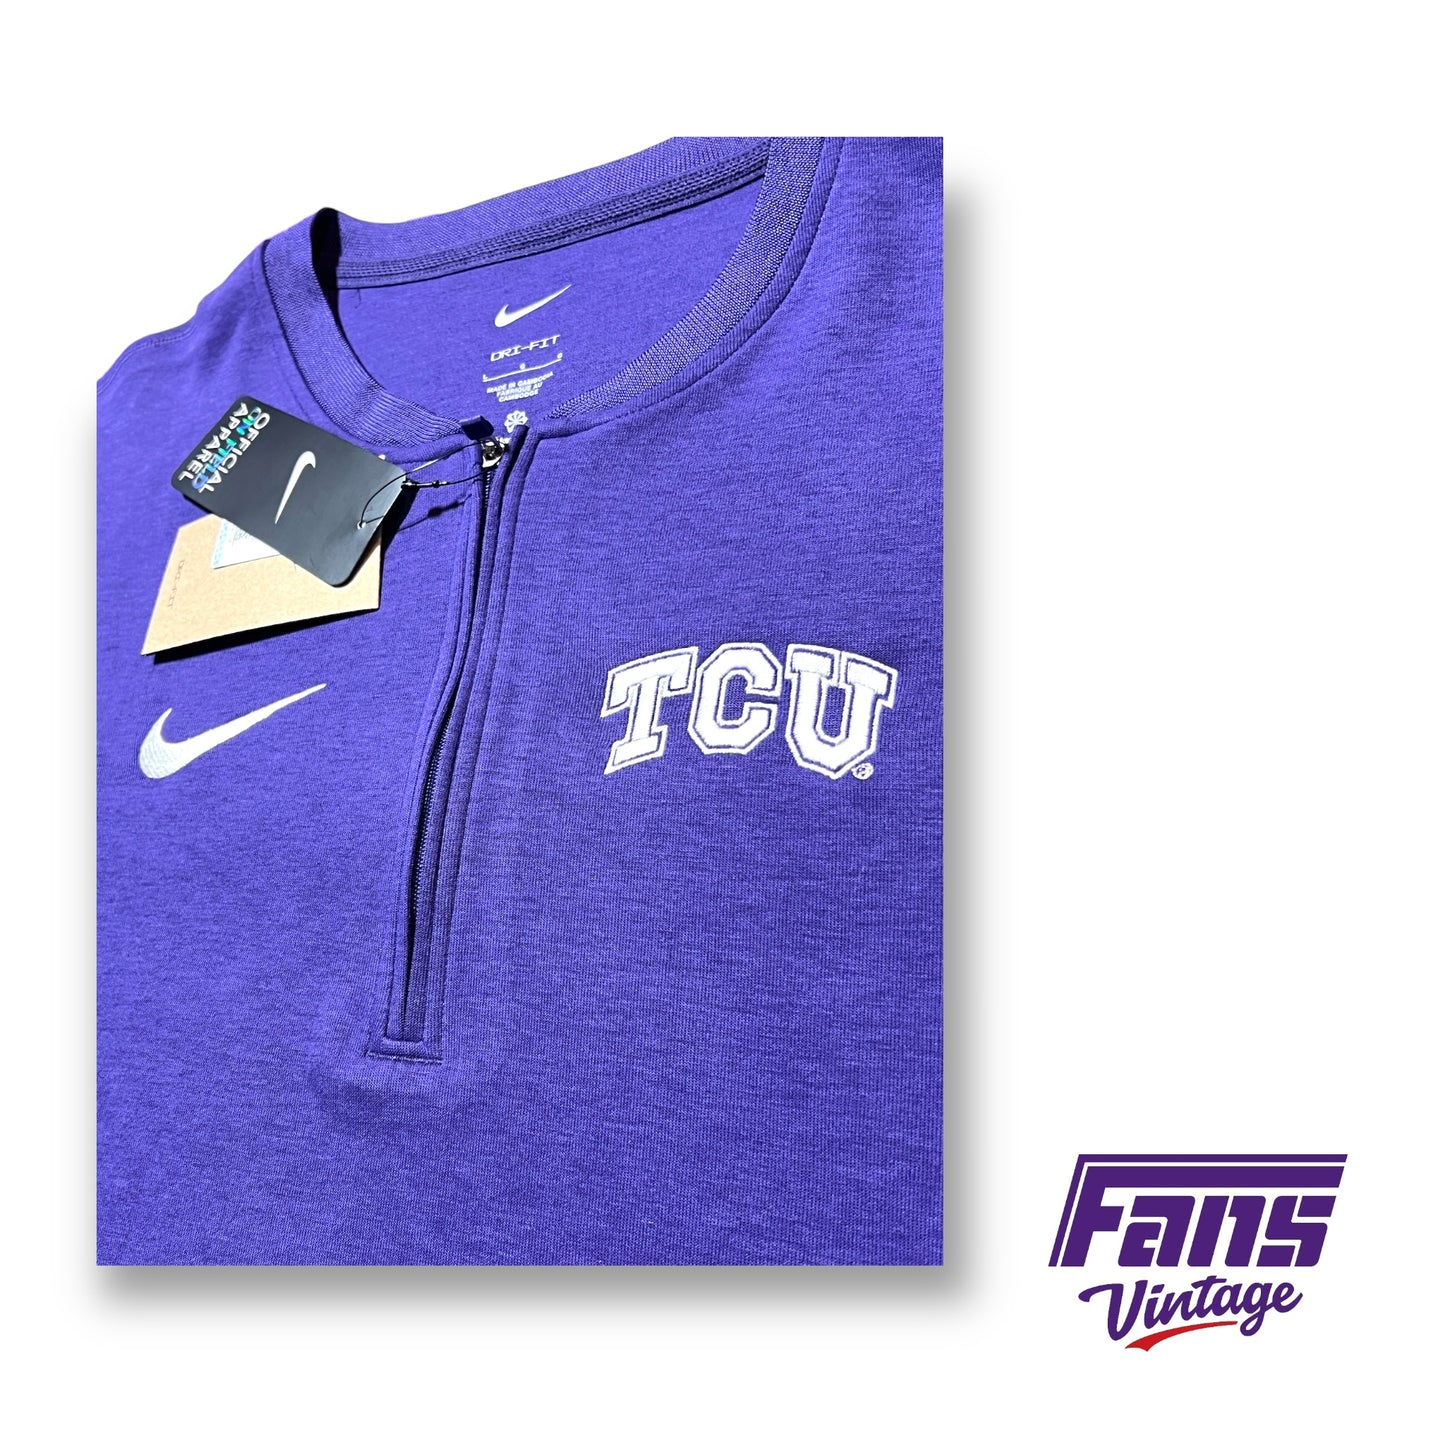 TCU Football Team Issue No Collar Coach’s Nike Quarterzip Pullover - New with Tags!